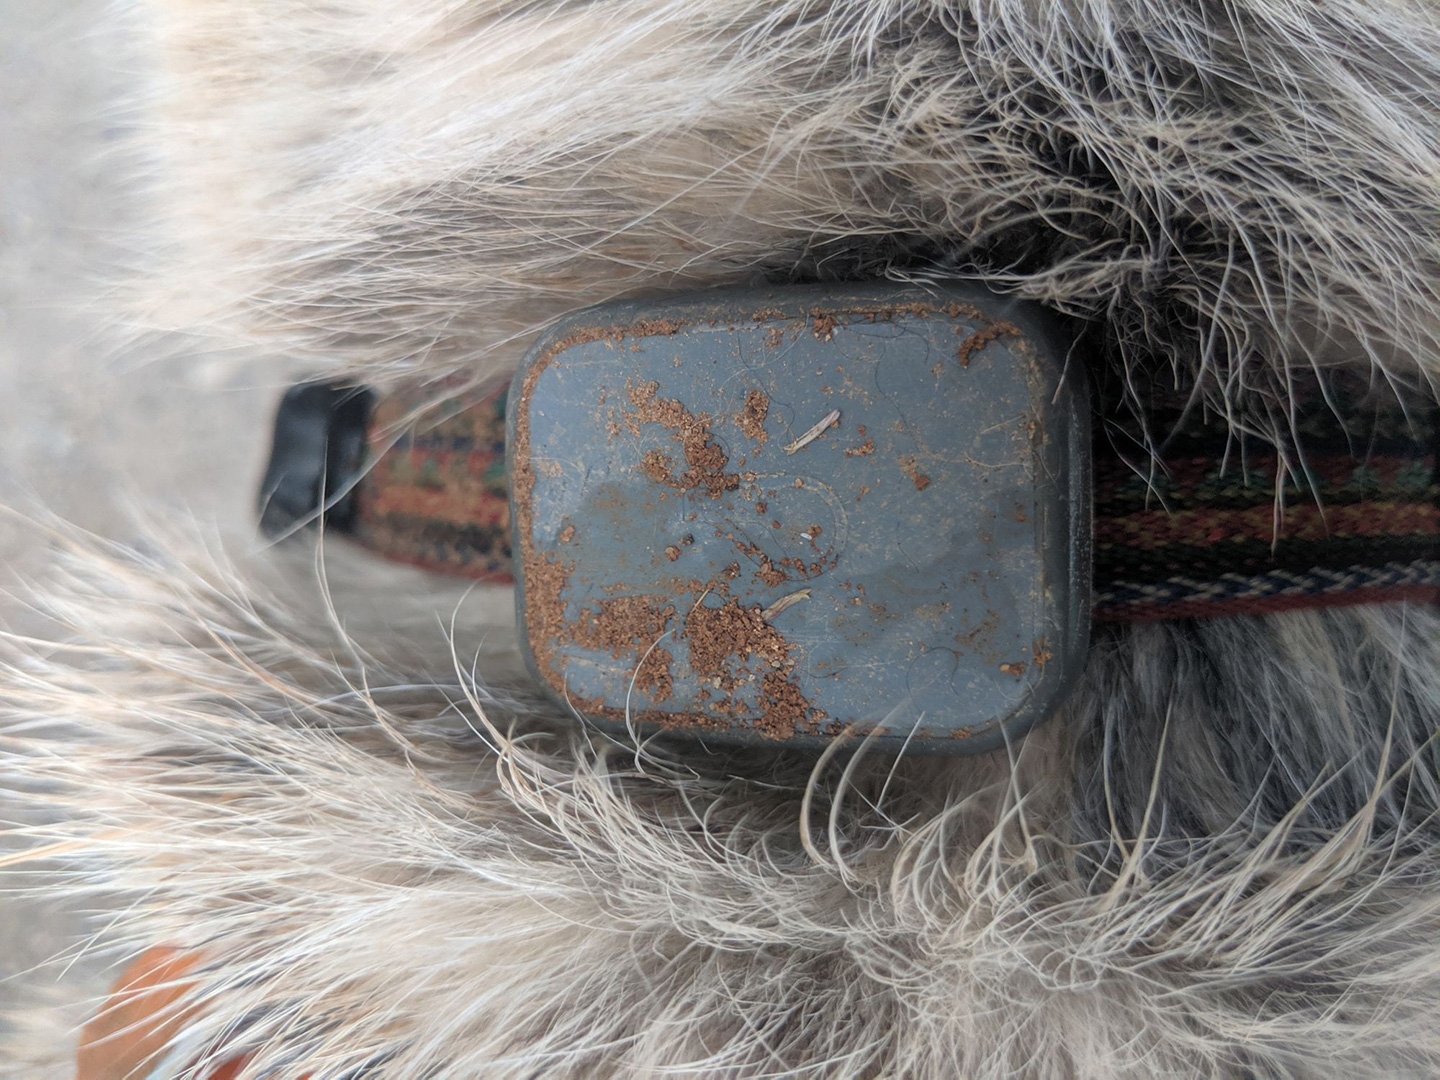 The Whistle 3 is a durable waterproof GPS dog tracker